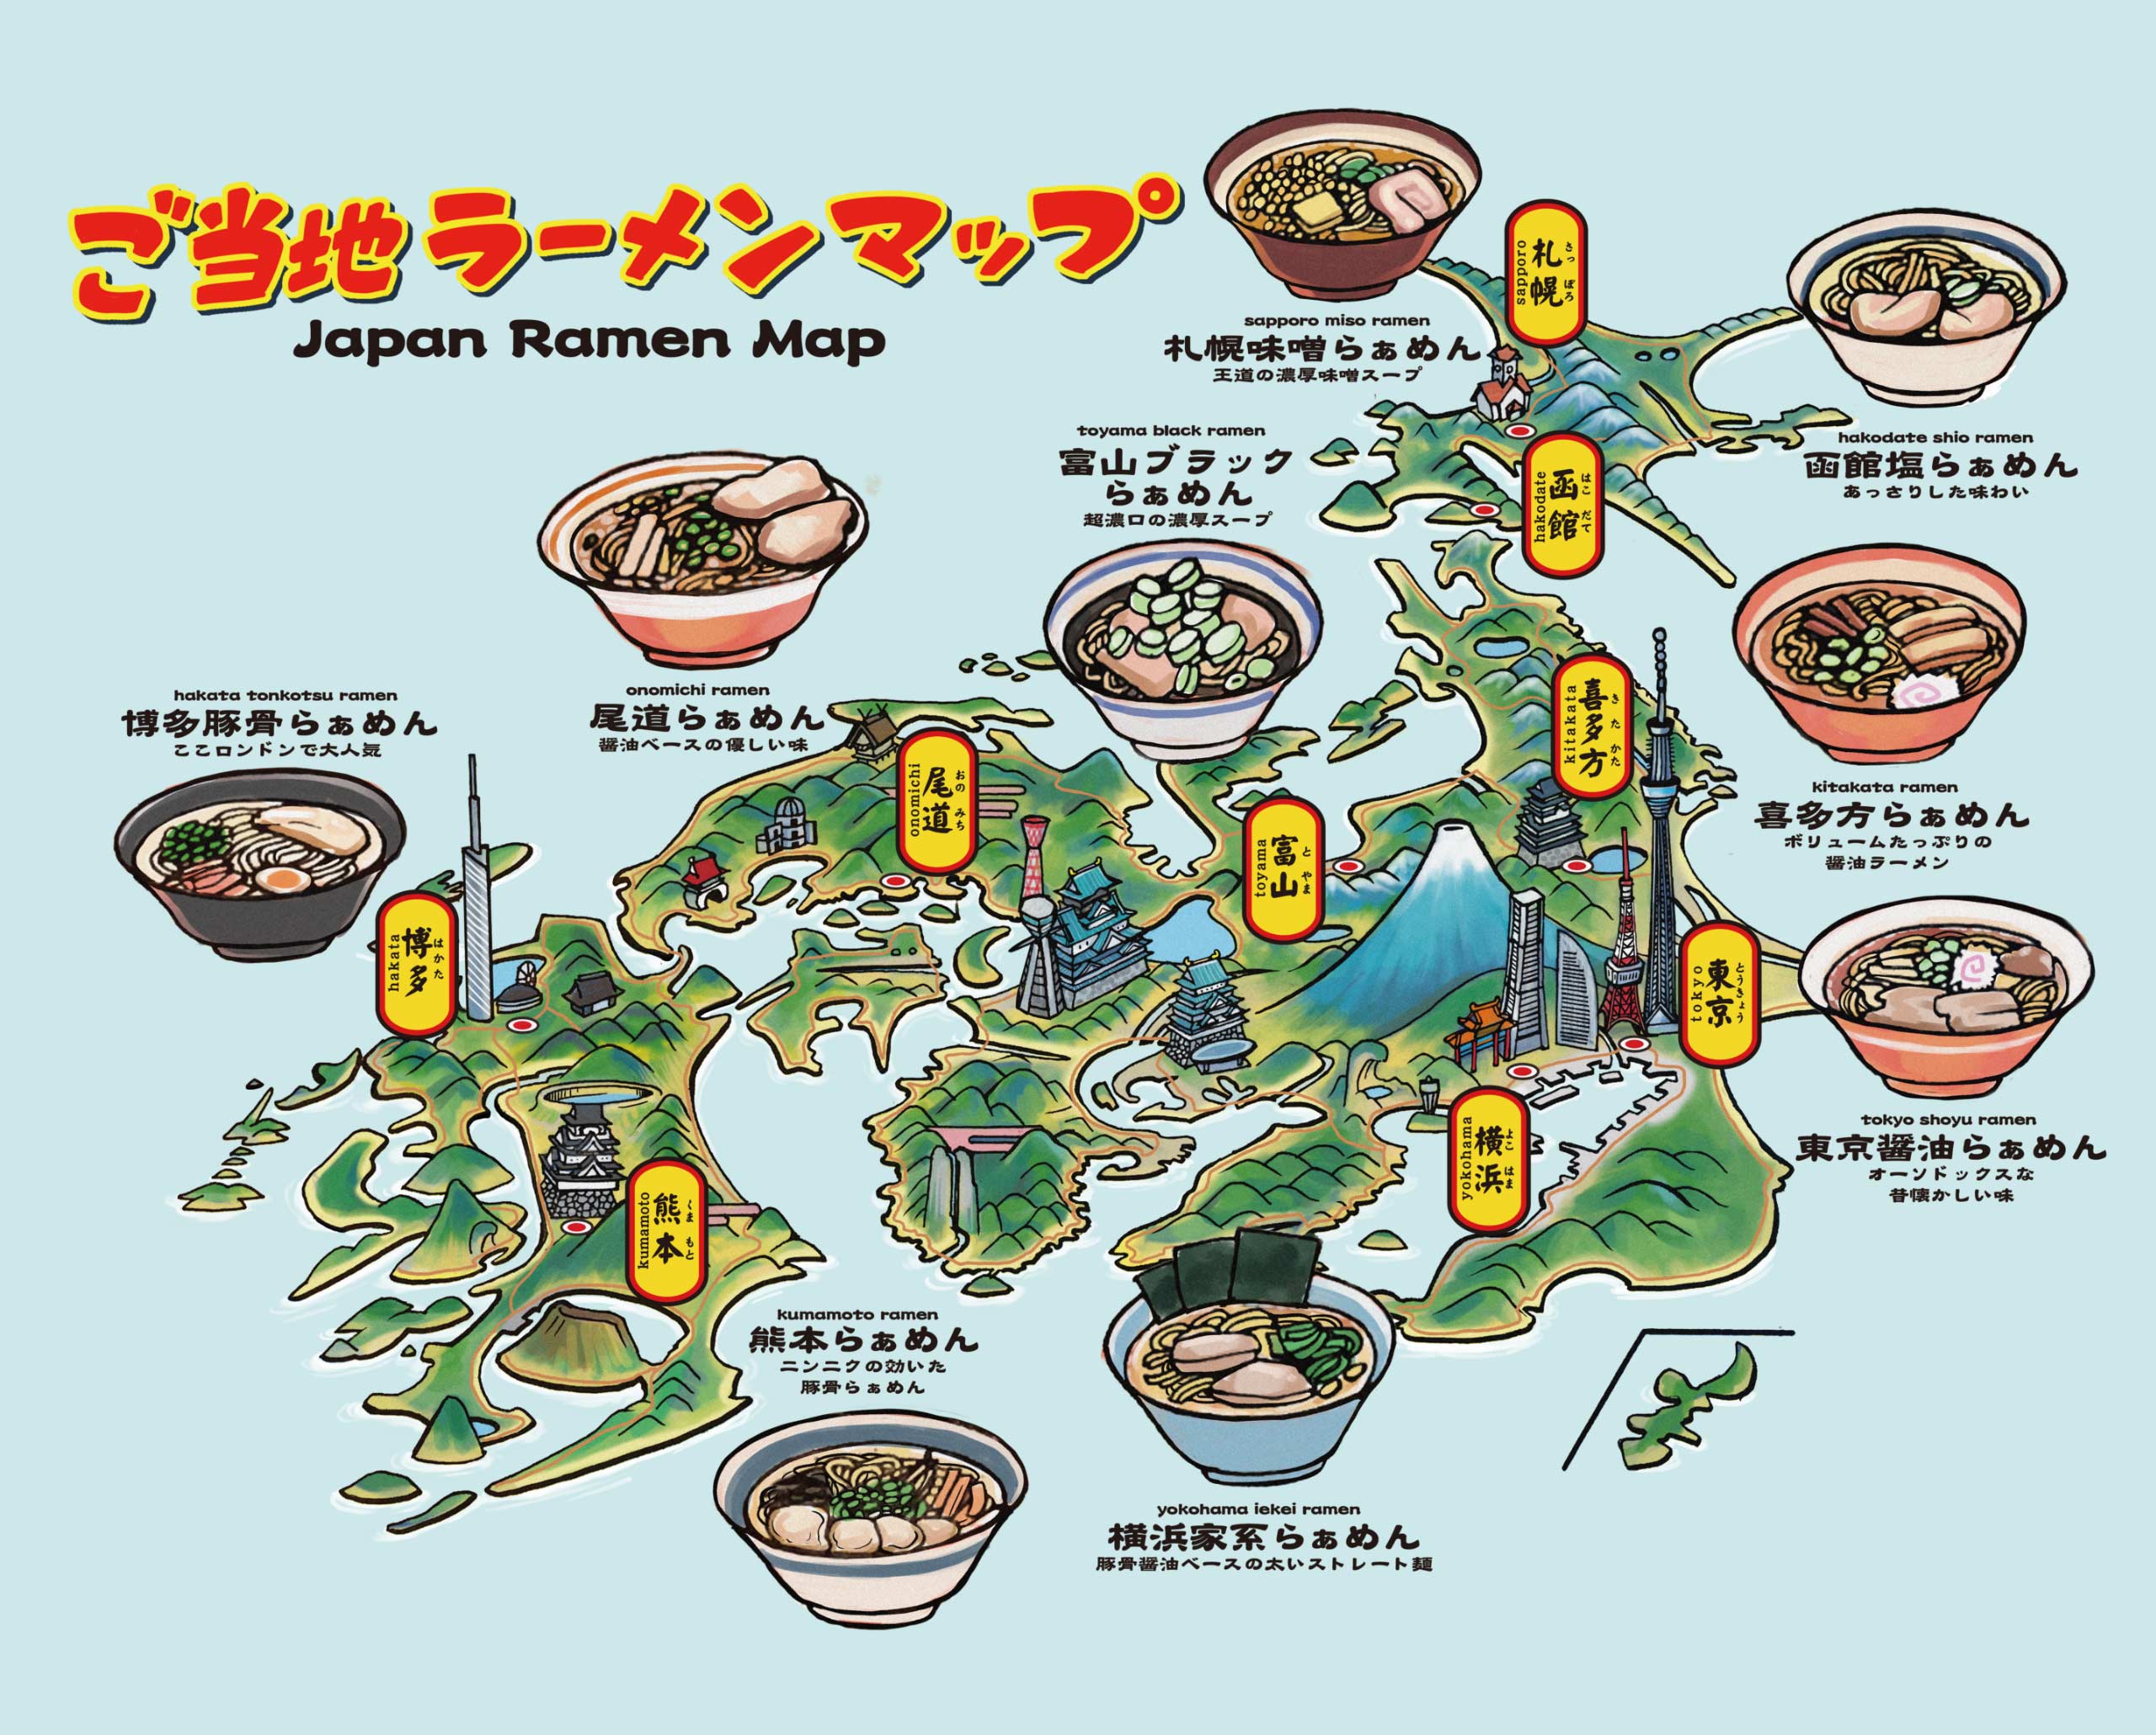 a stylised map of Japan showing the different types of ramen and from where they originate